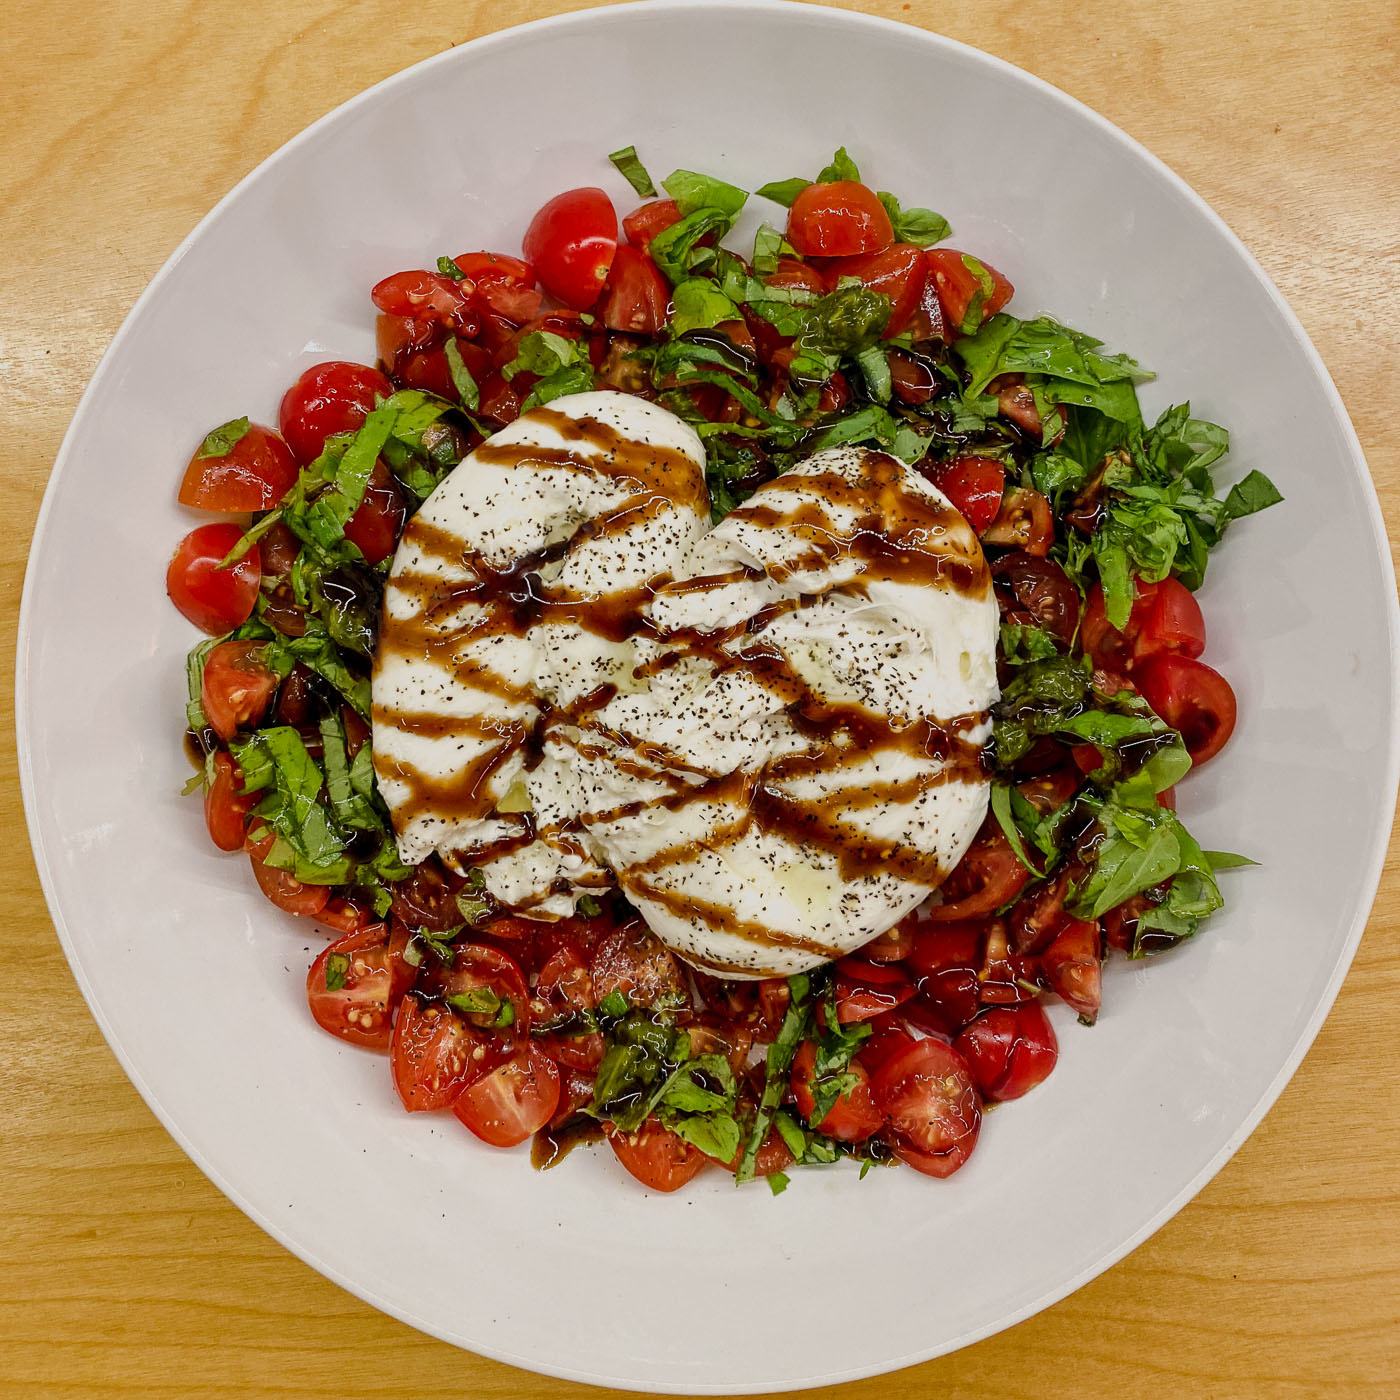 Quick and easy. Tomatoes, loads of basil, a nice burrata, drizzle with olive oil and balsamic glaze. 